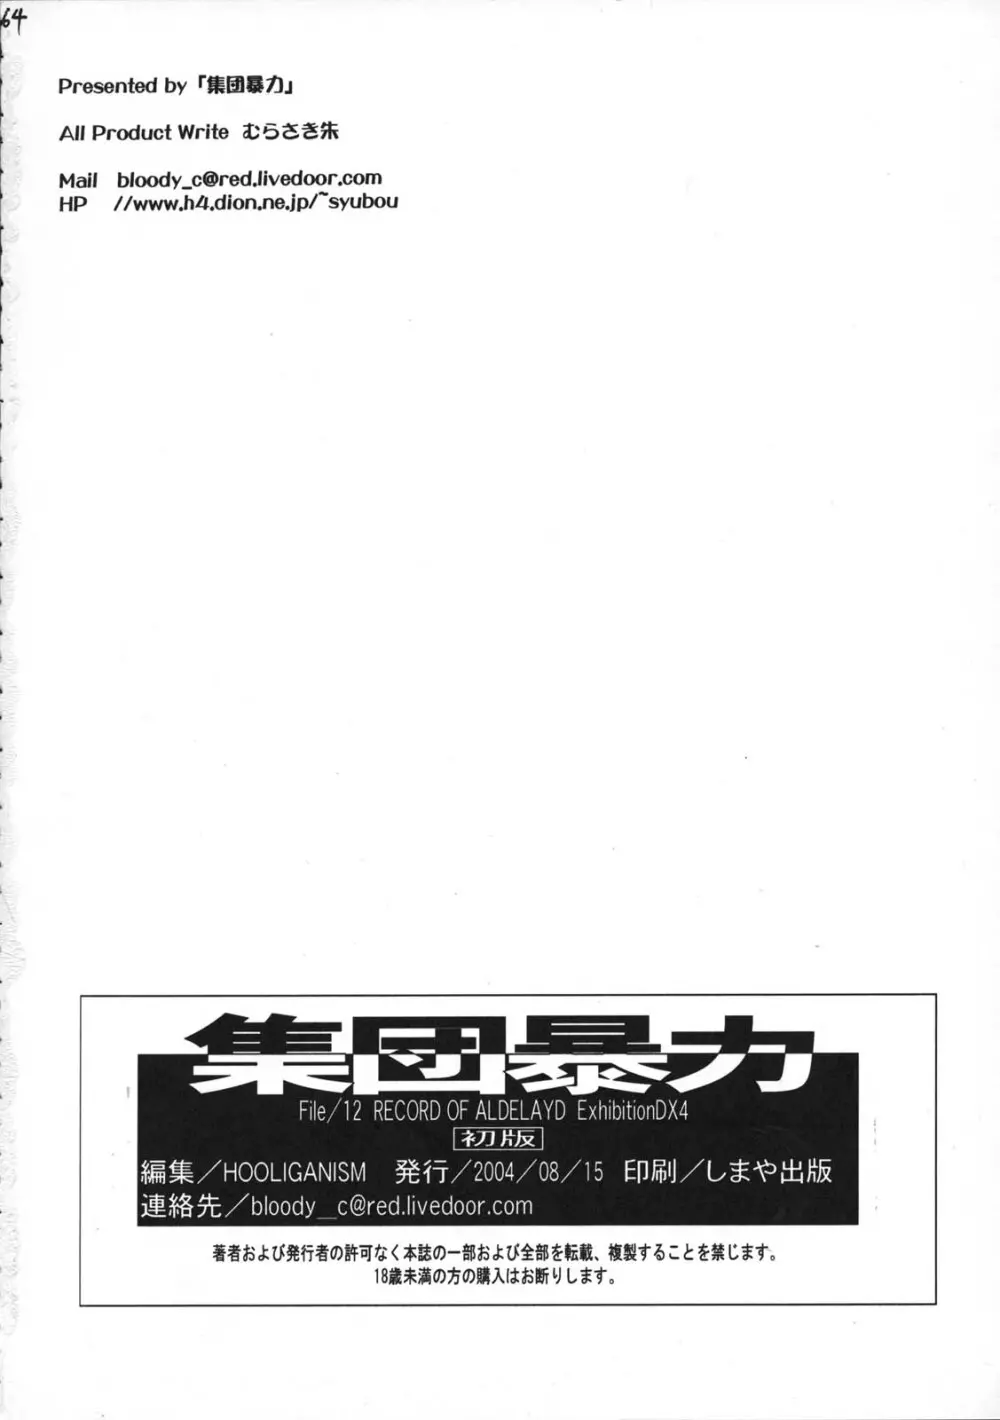 File/12 Record of Aldelayd - EXHIBITION DX4 - page65